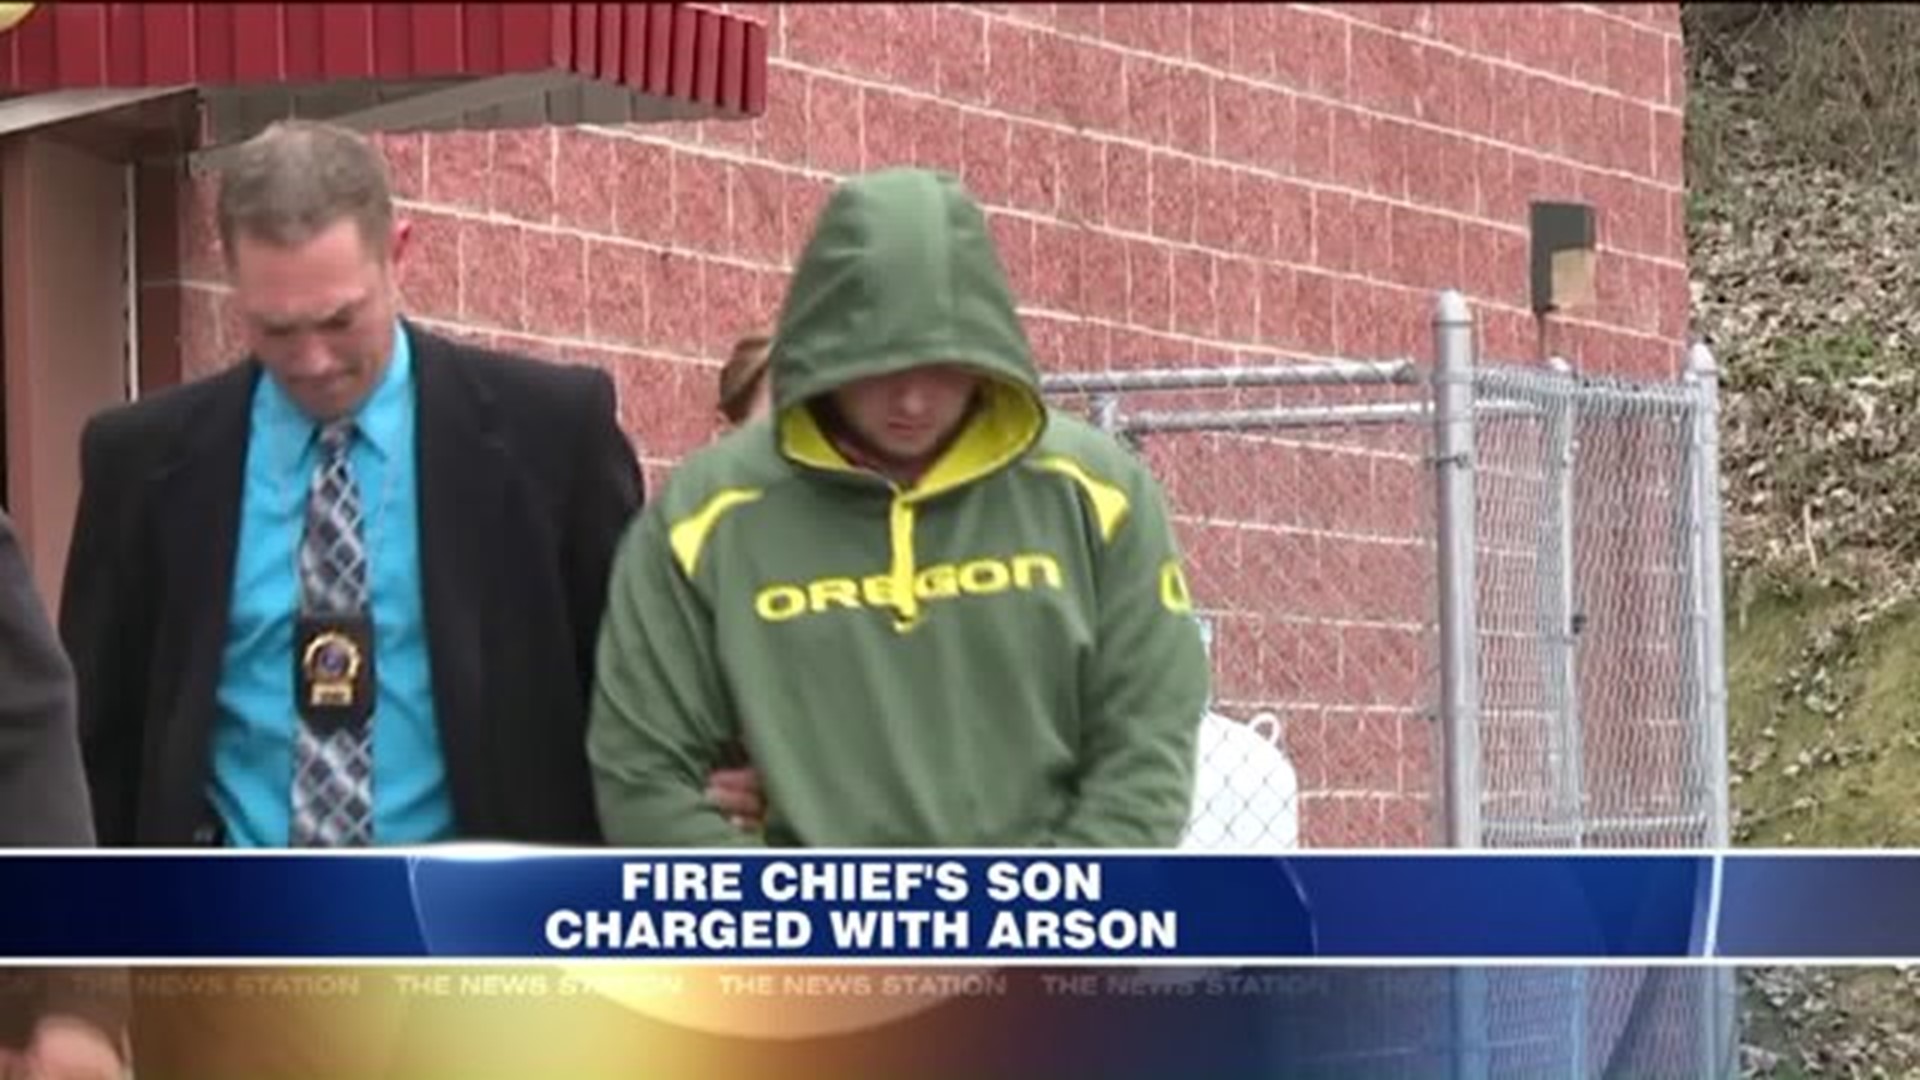 Firefighter Charged with Arson in Wilkes-Barre Township